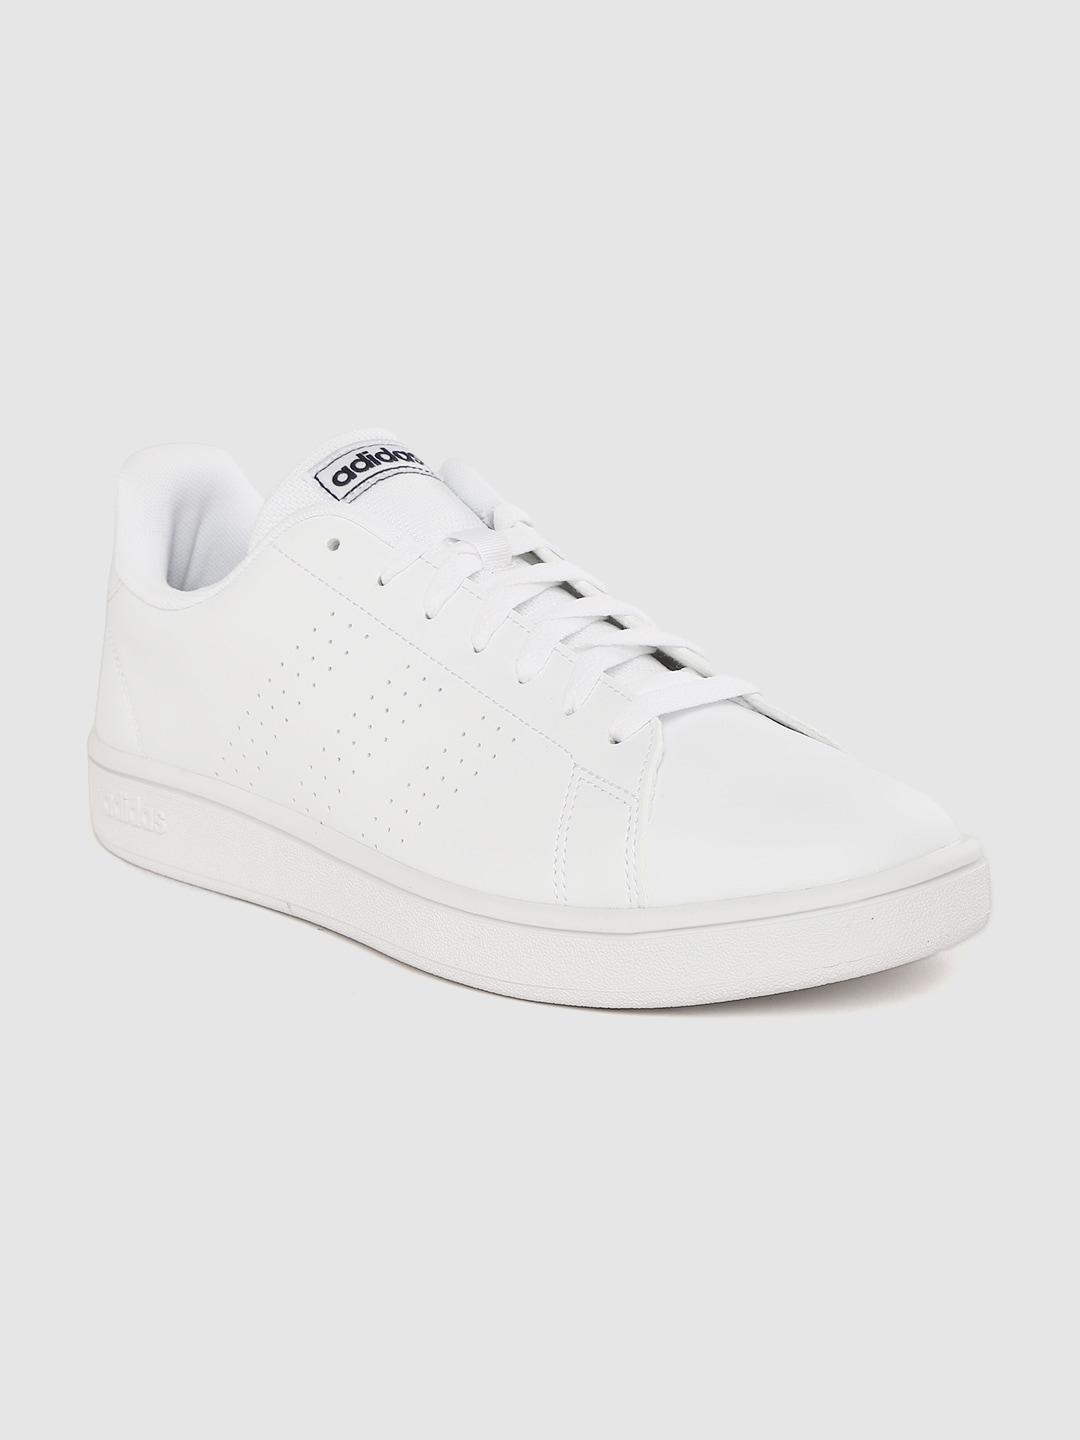 adidas men white solid advantage base sustainable sneakers